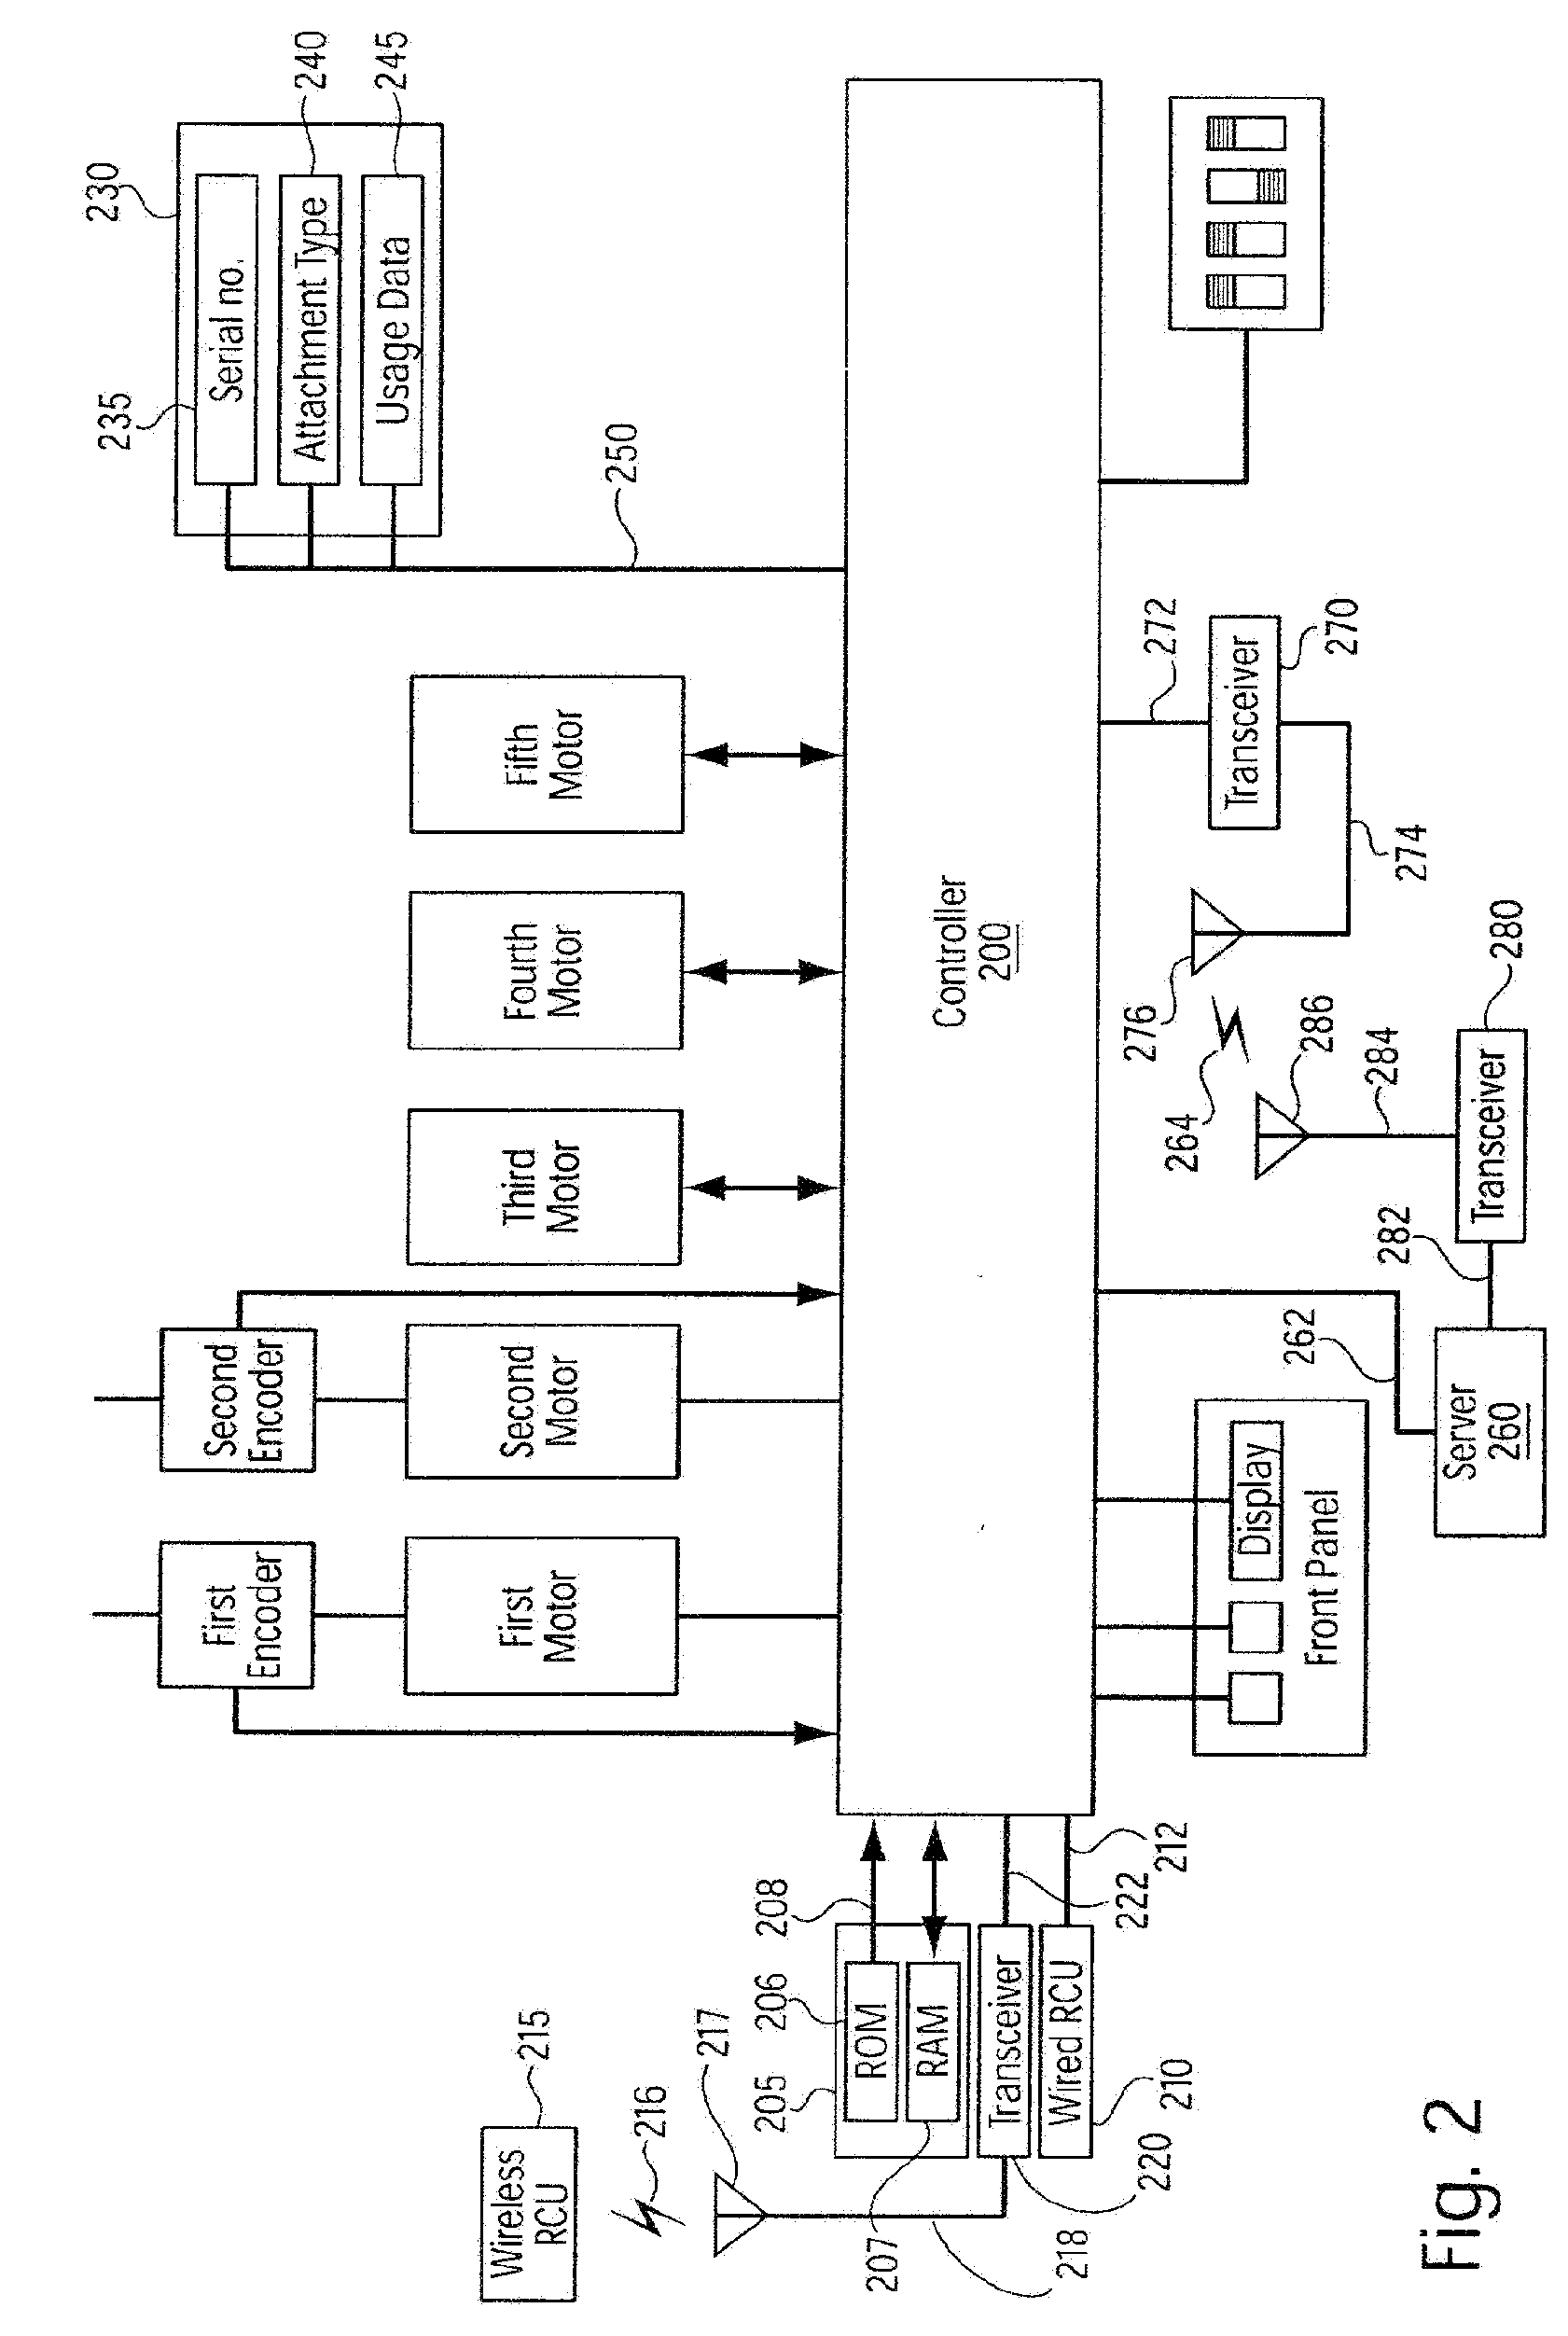 Method and system for integrated medical tracking